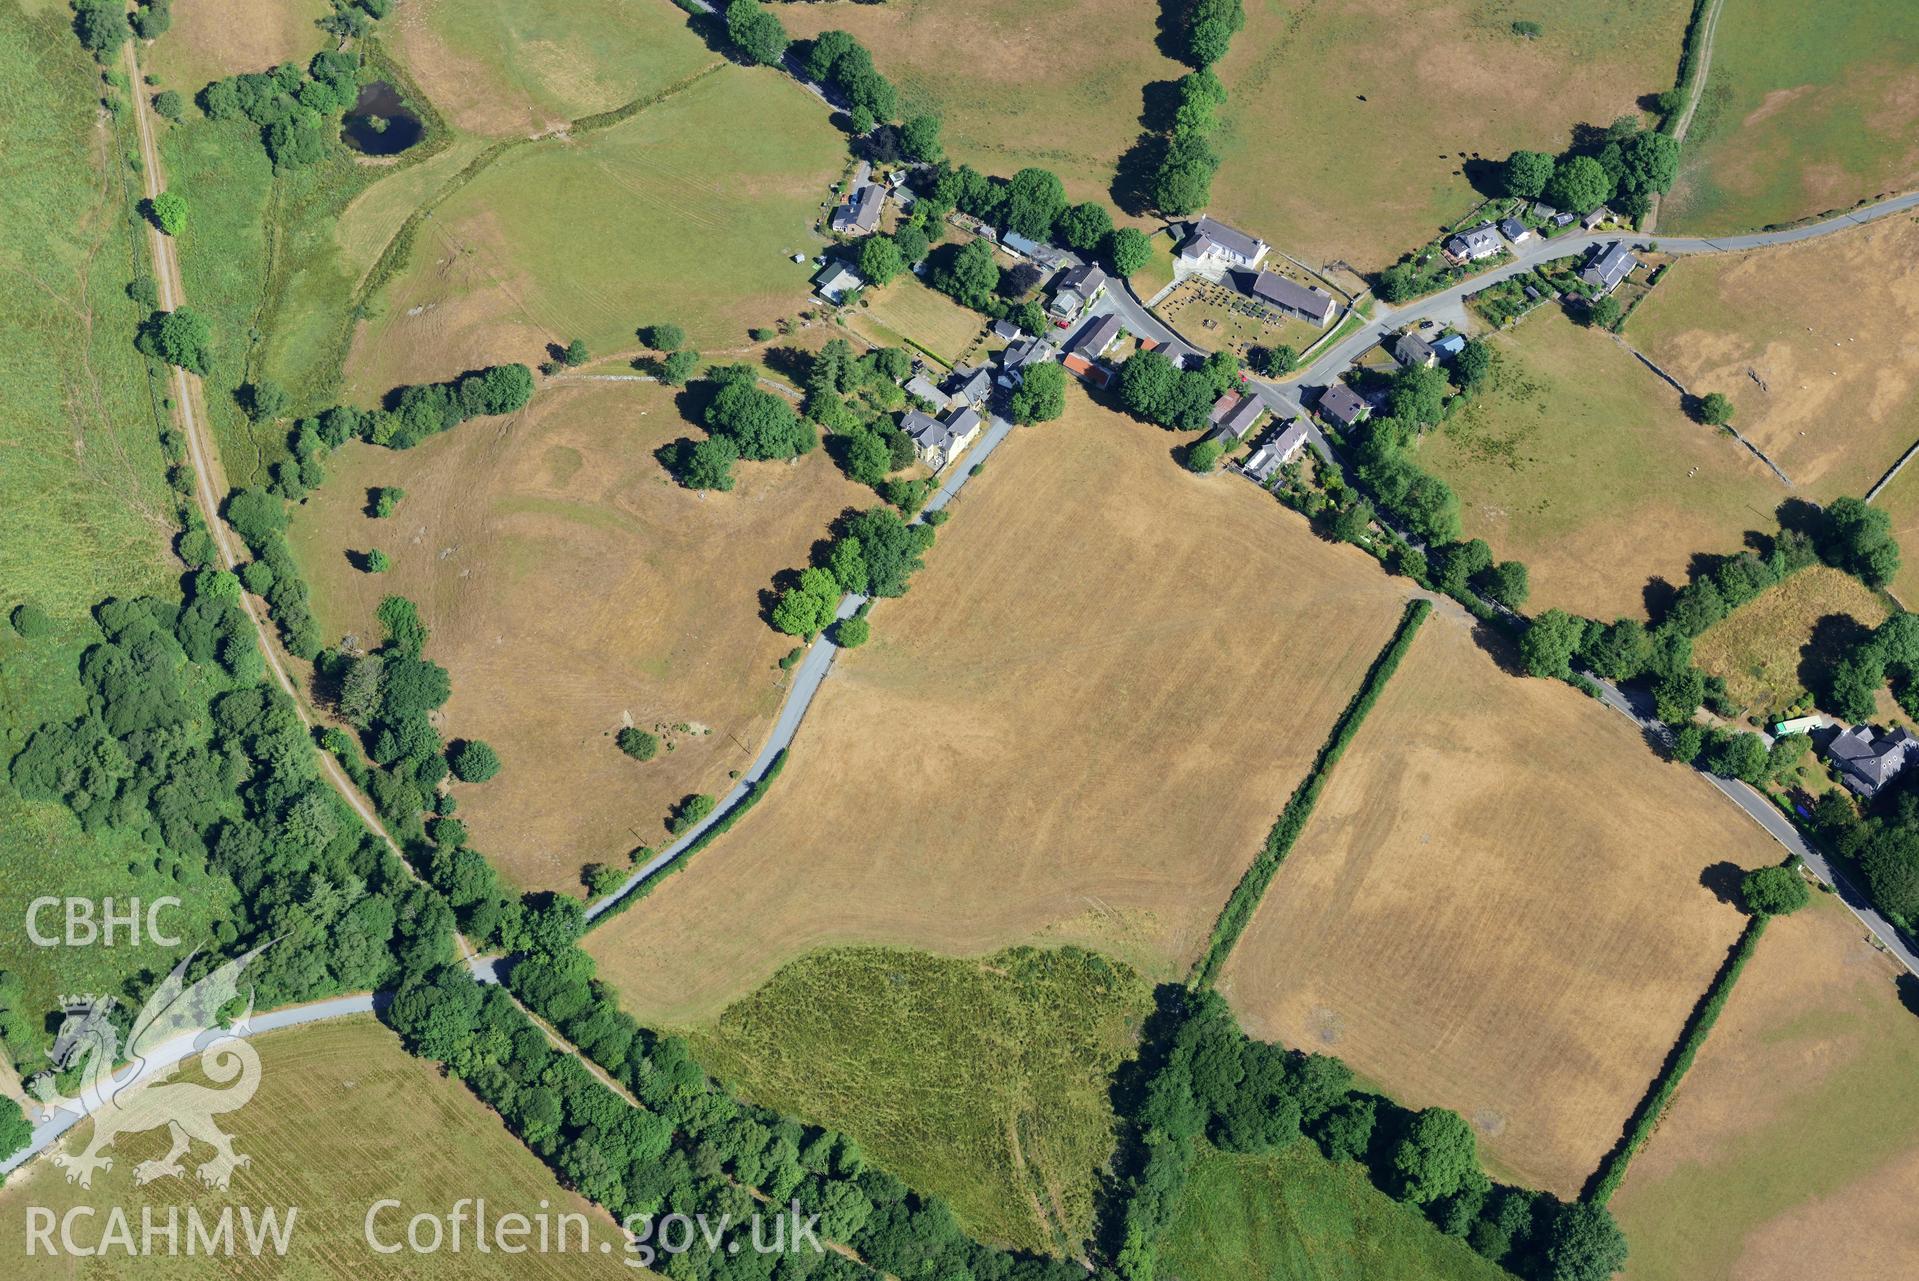 Royal Commission aerial photography of Ystrad Meurig castle and village with extensive parching, taken on 19th July 2018 during the 2018 drought.